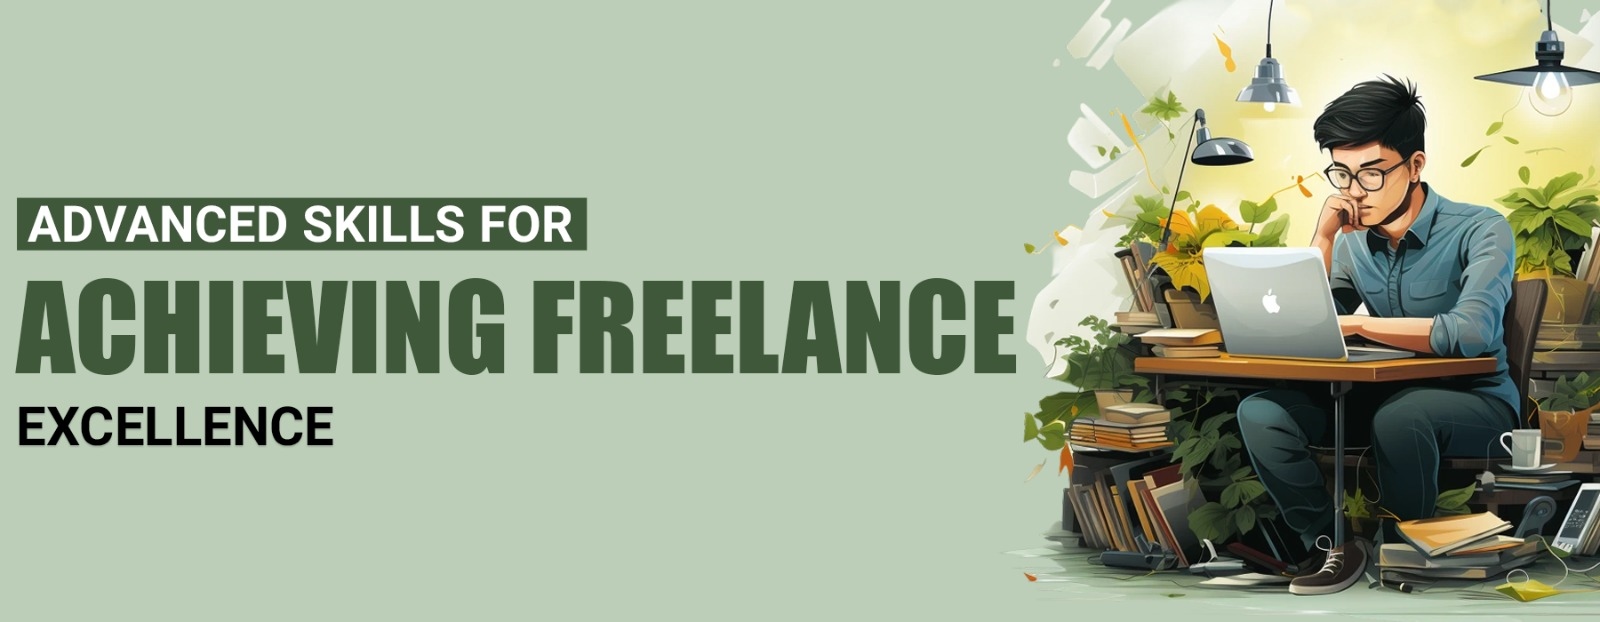 Advanced Skills for Achieving Freelance Excellence